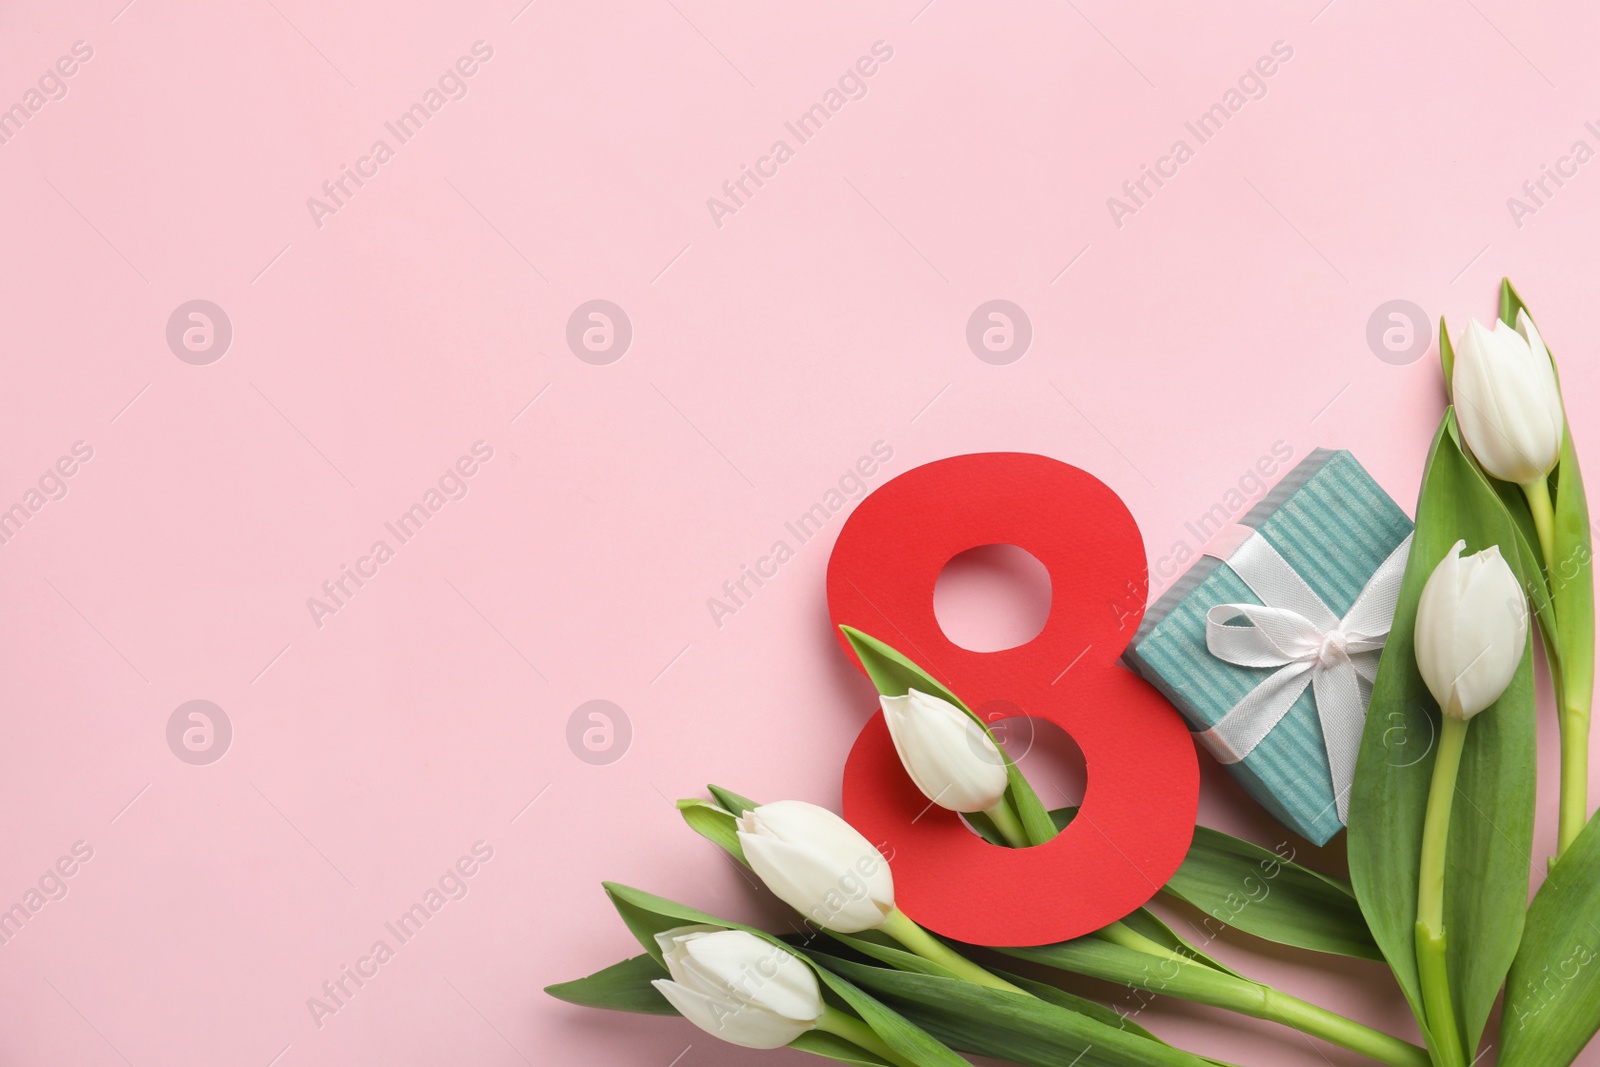 Photo of 8 March card design with tulips, gift and space for text on pink background, flat lay. International Women's Day